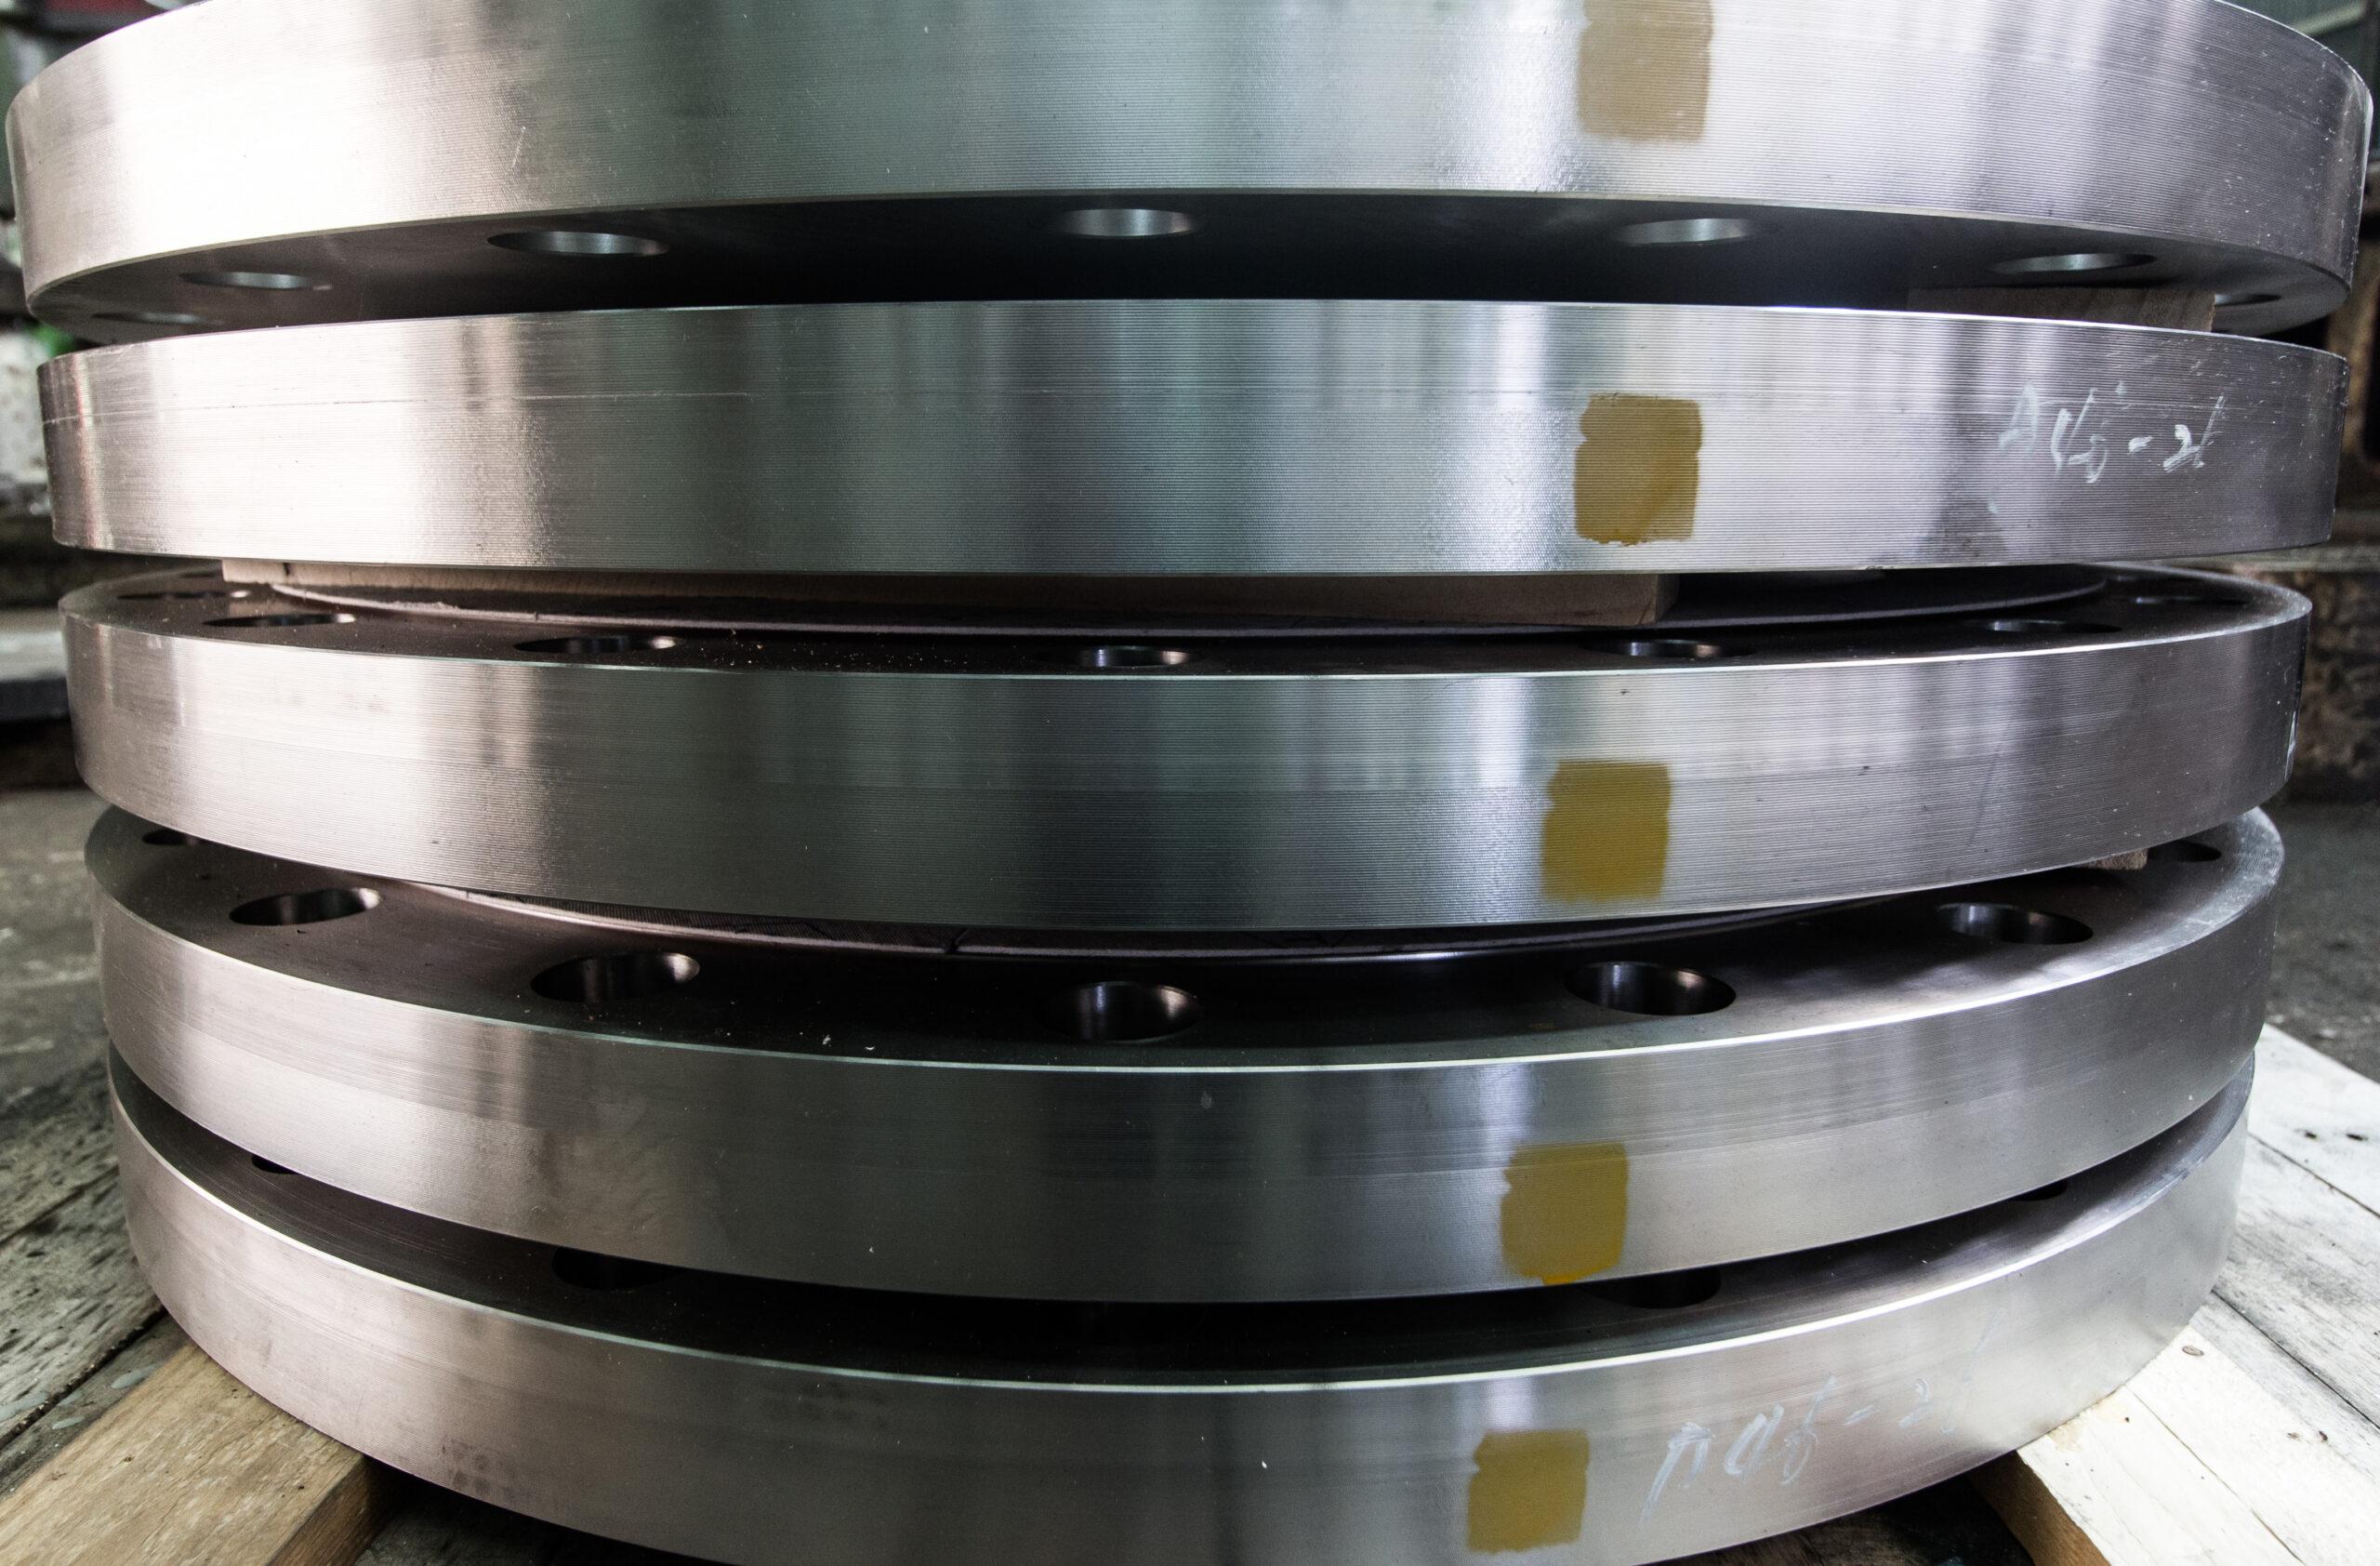 Forging Ahead: Speedy Delivery of High Quality, Seamless and Contoured Rolled Rings